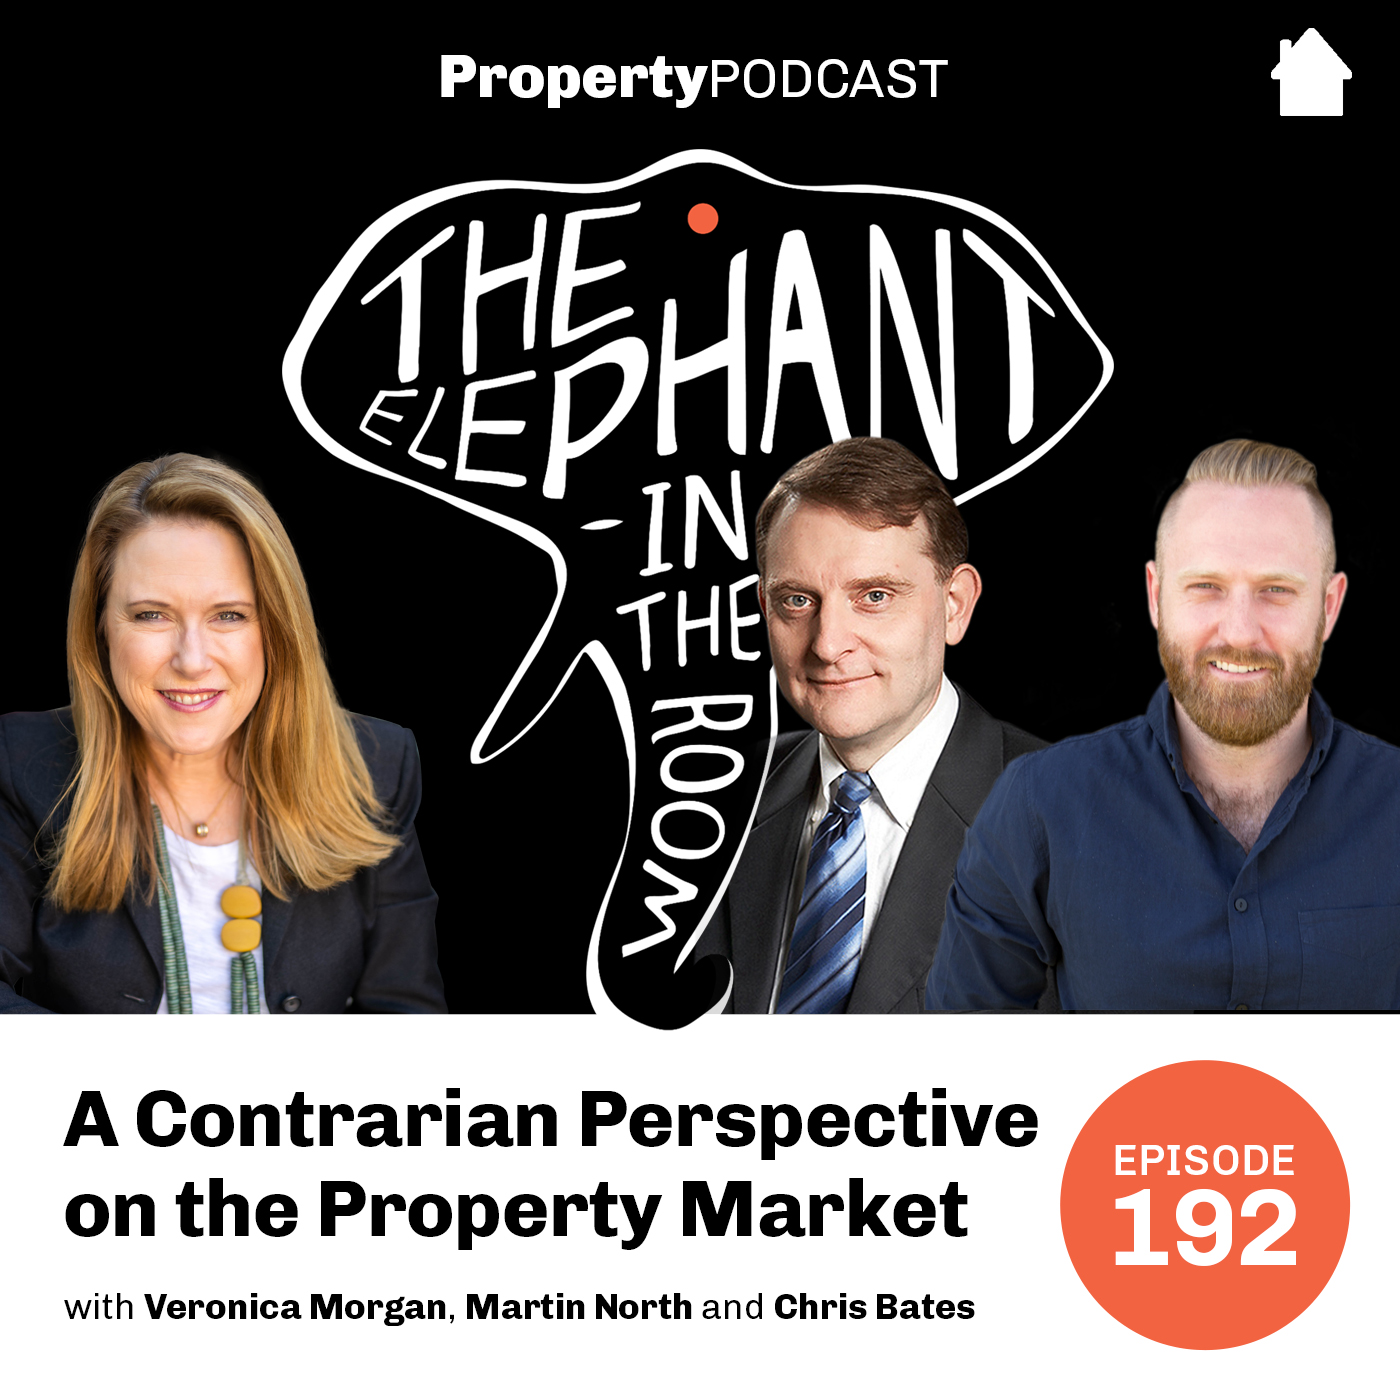 Martin North | A Contrarian Perspective on the Property Market